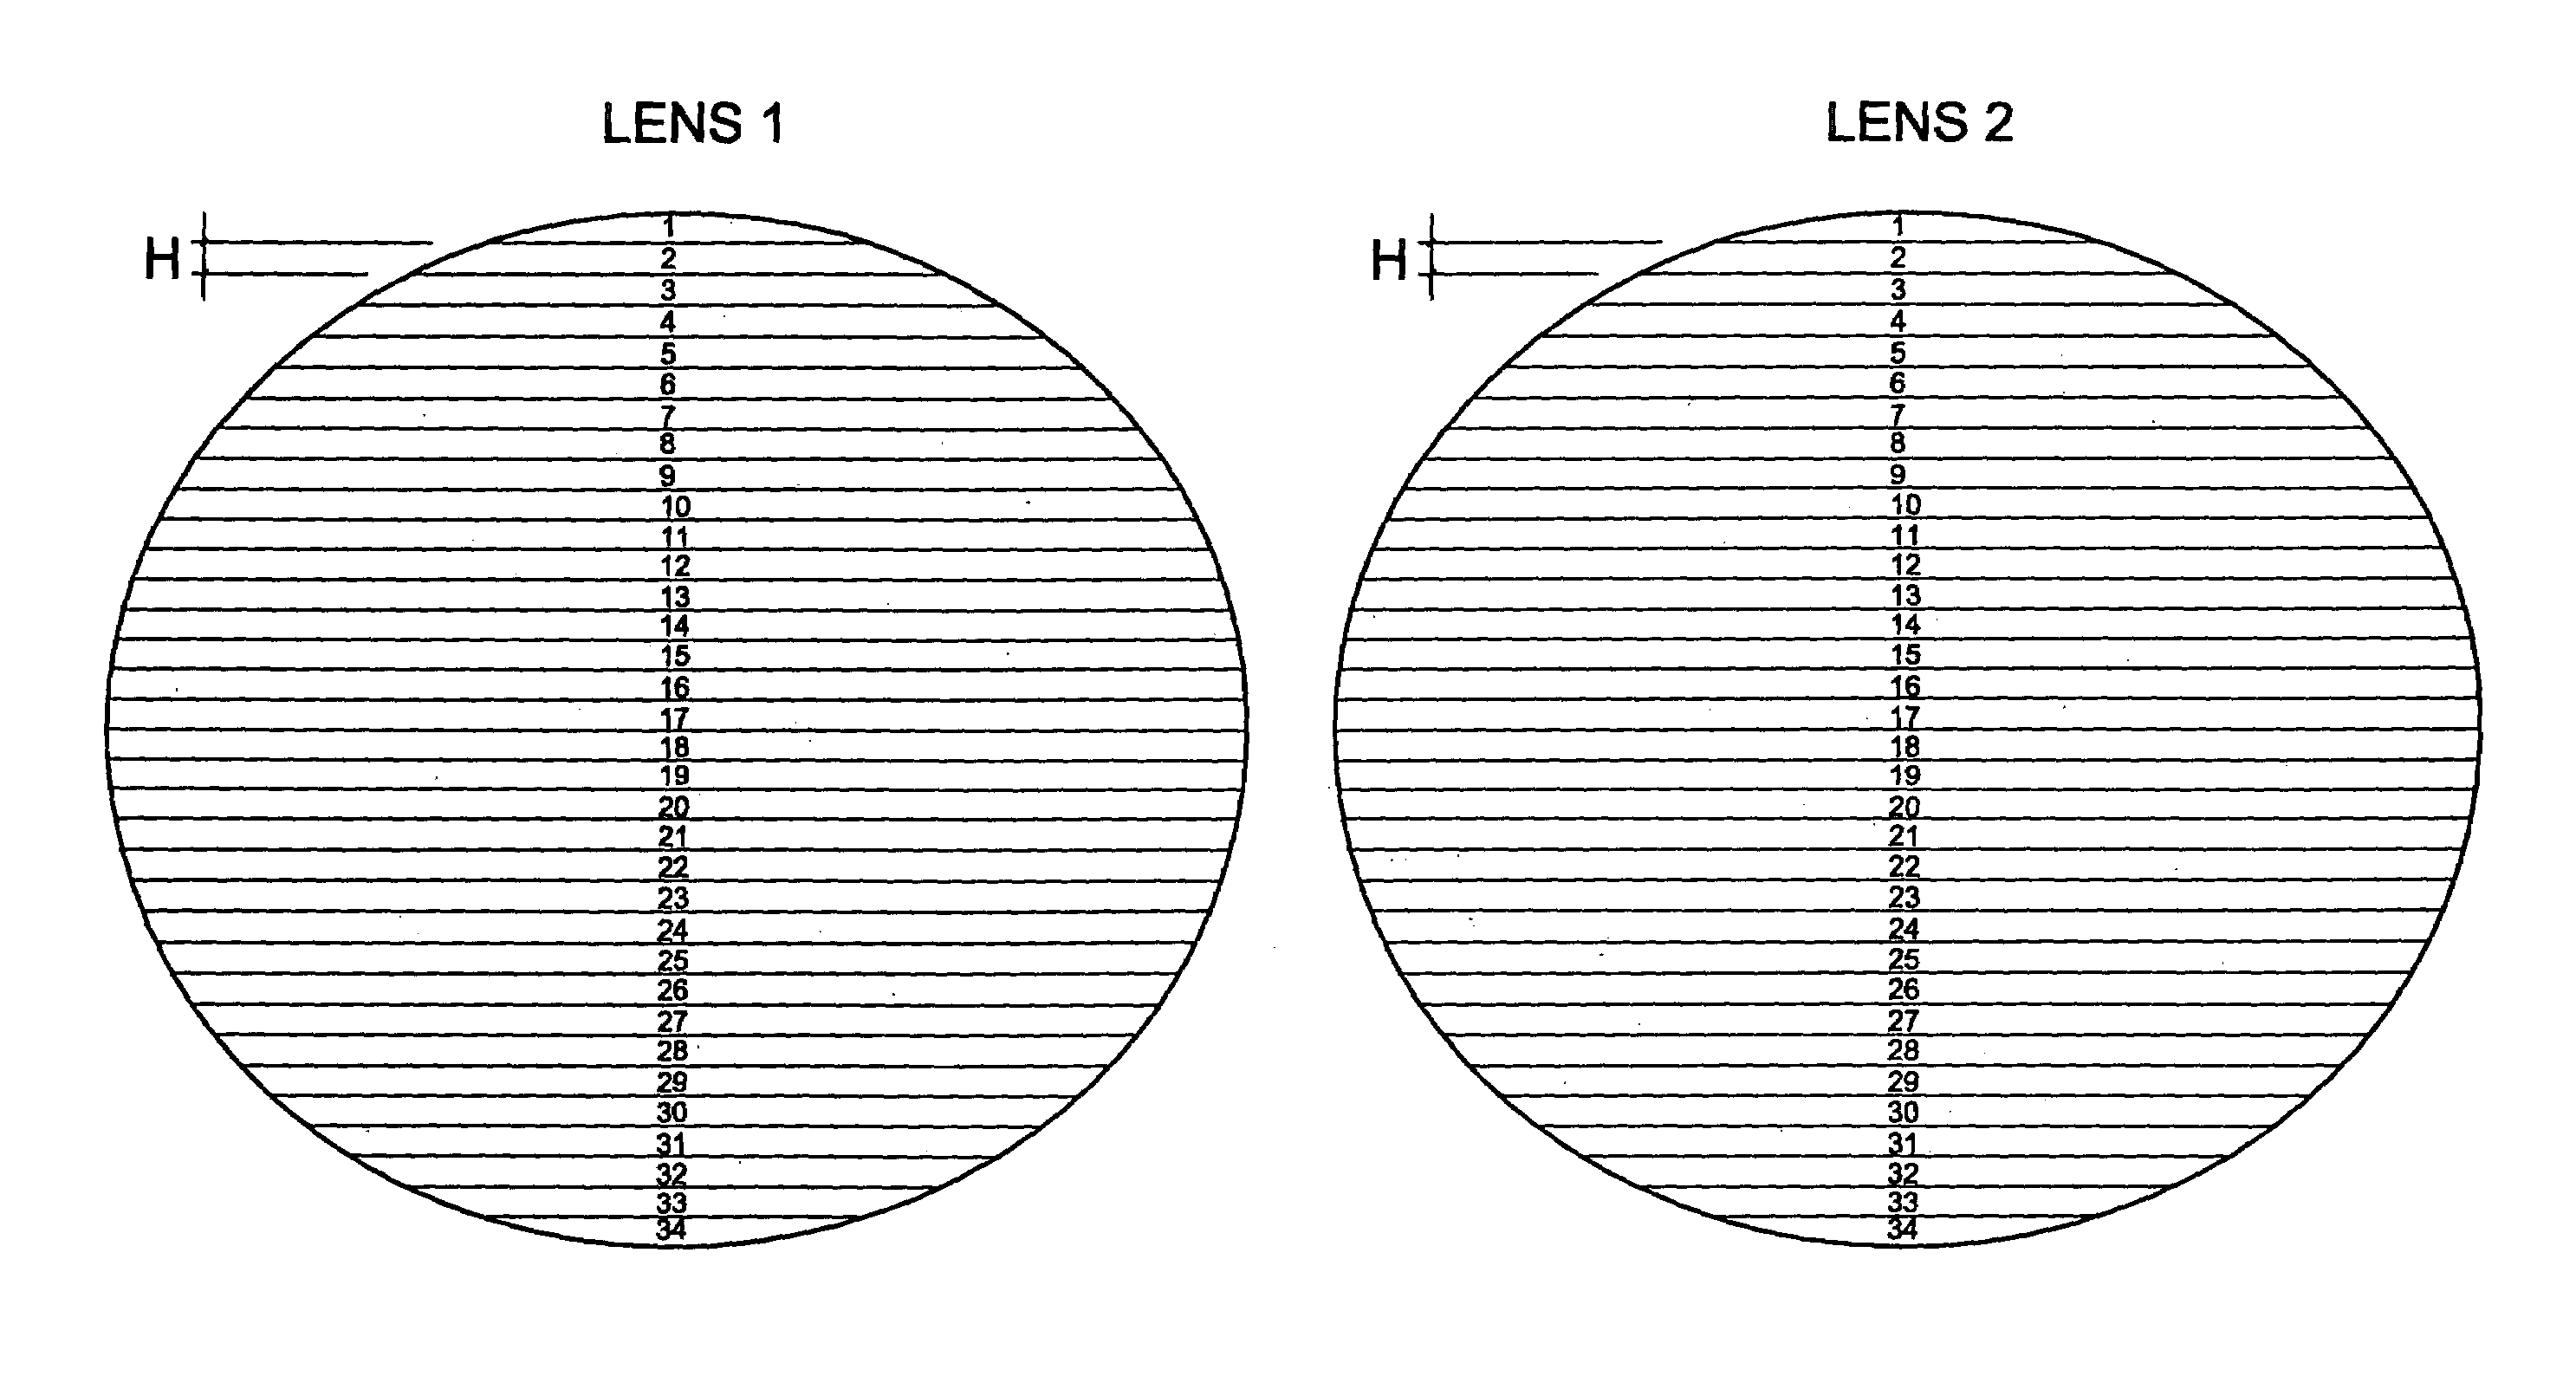 Dual complementary two-color optics which enables a user to see true neutral color, with improved shading design and shadow detail